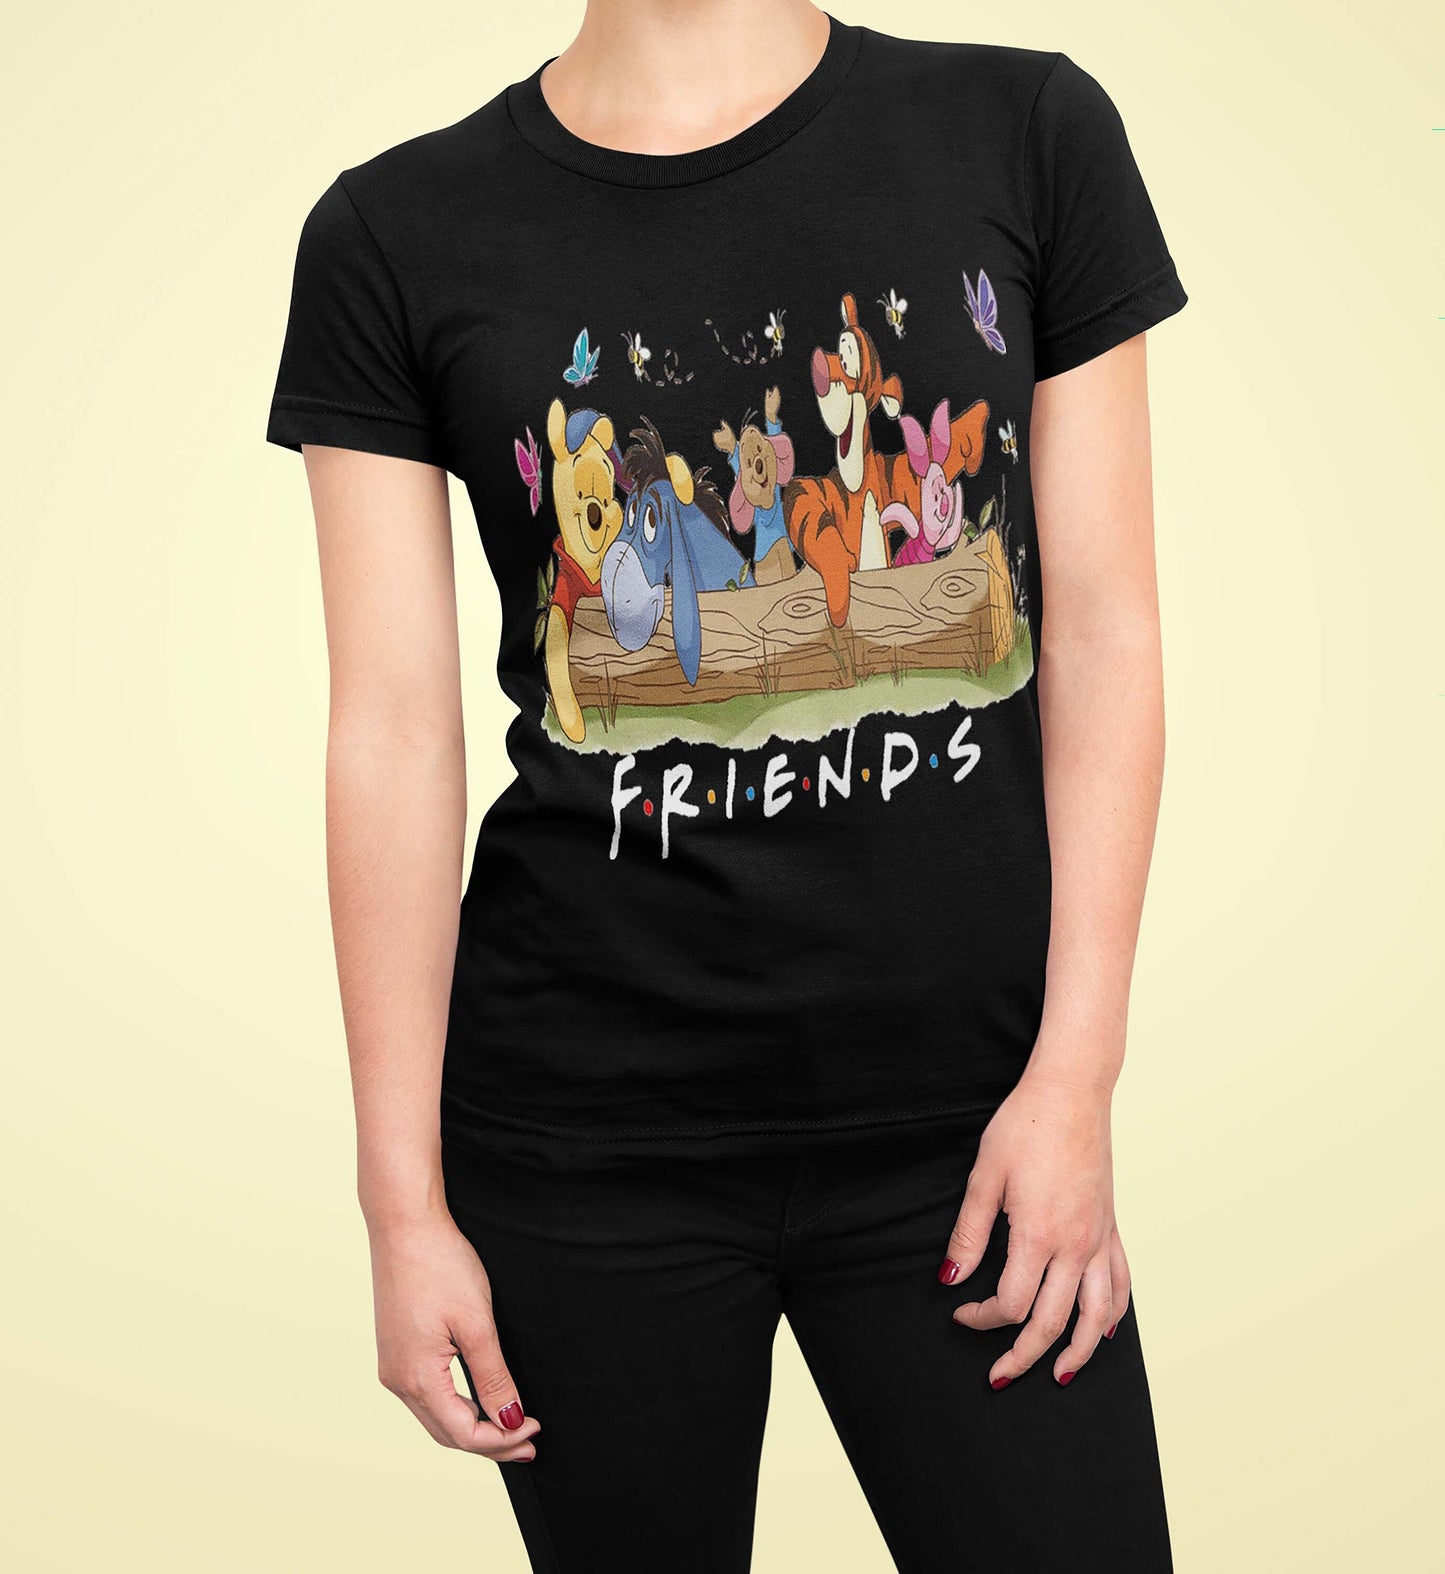 The Perfect Shirt for Winnie the Pooh and Friends Fans